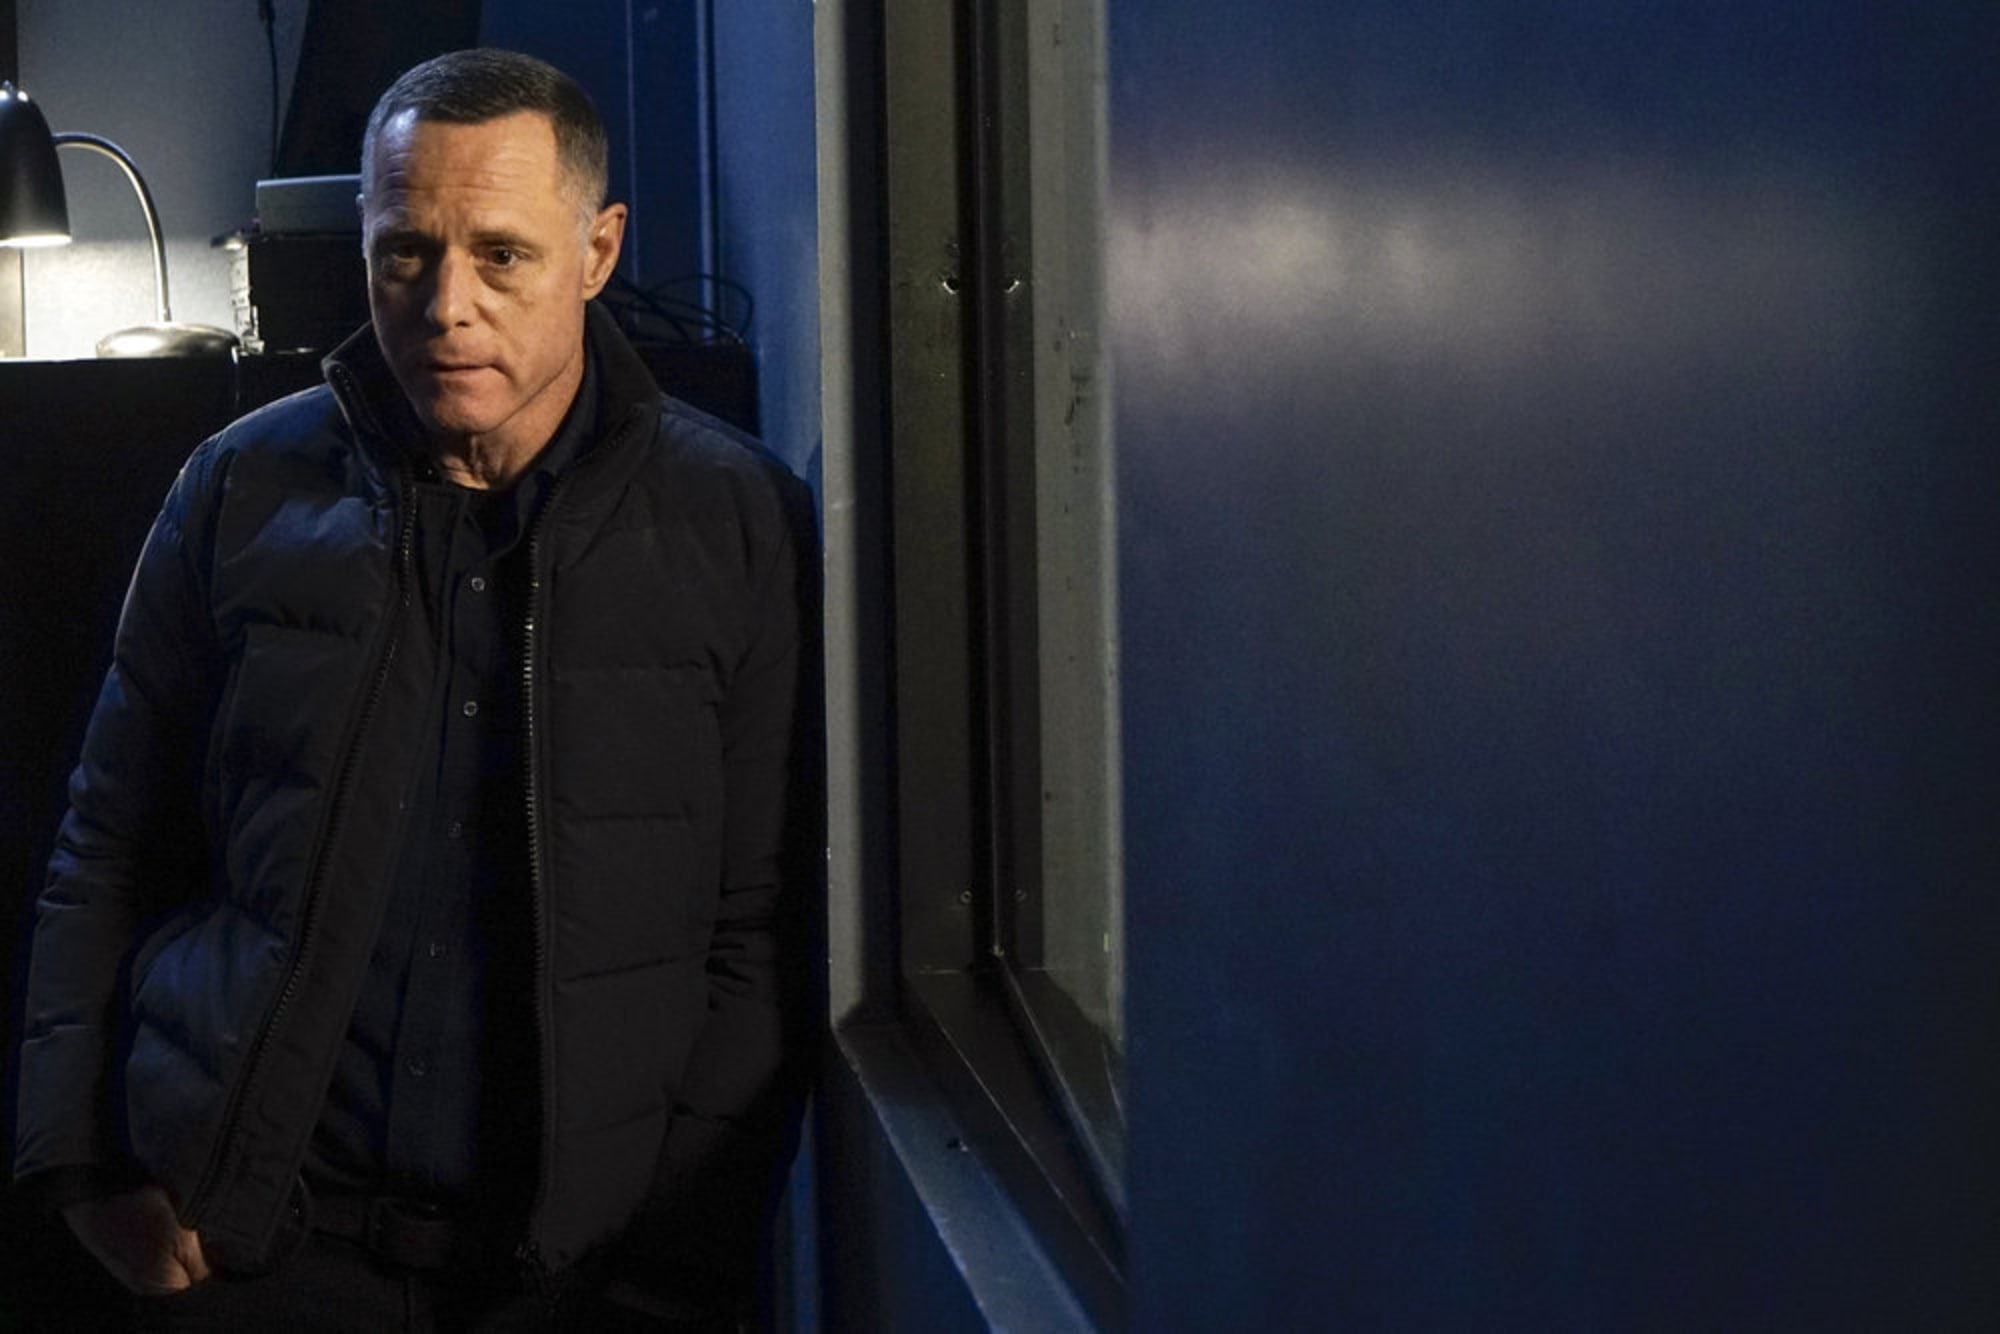 Chicago Pd Season 8 Character Preview Hank Voight Page 2 